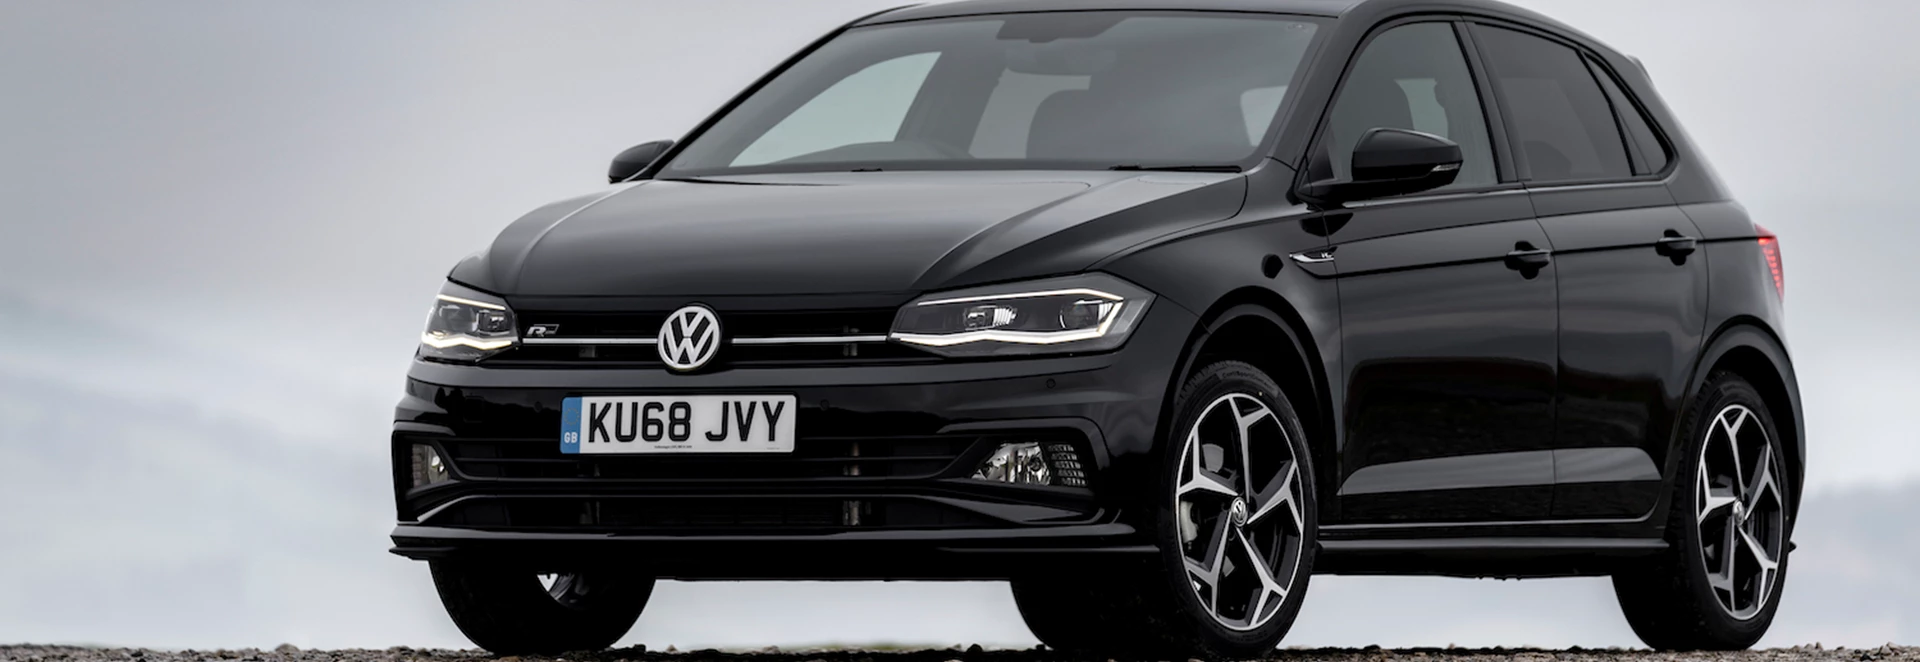 Volkswagen Polo named UK Car of the Year best supermini of 2019